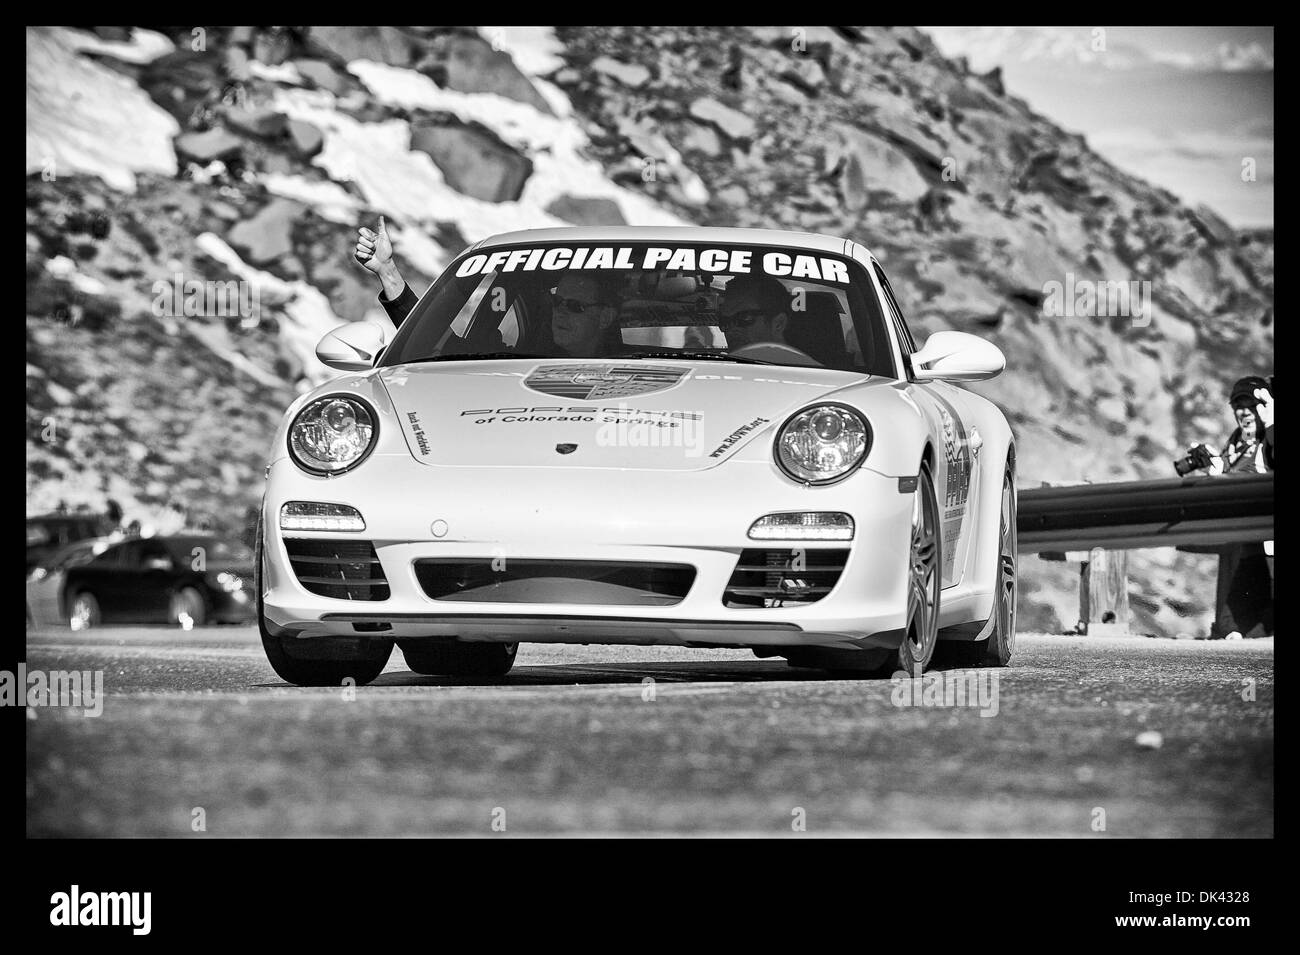 Colorado Springs, Colorado, USA. 26th June, 2011. November 30, 2013: Actor Paul Walker drives the Porsche pace car up Pikes Peak during the 2011 Pikes Peak International Hill climb in Colorado Springs, Colorado. © csm/Alamy Live News Stock Photo